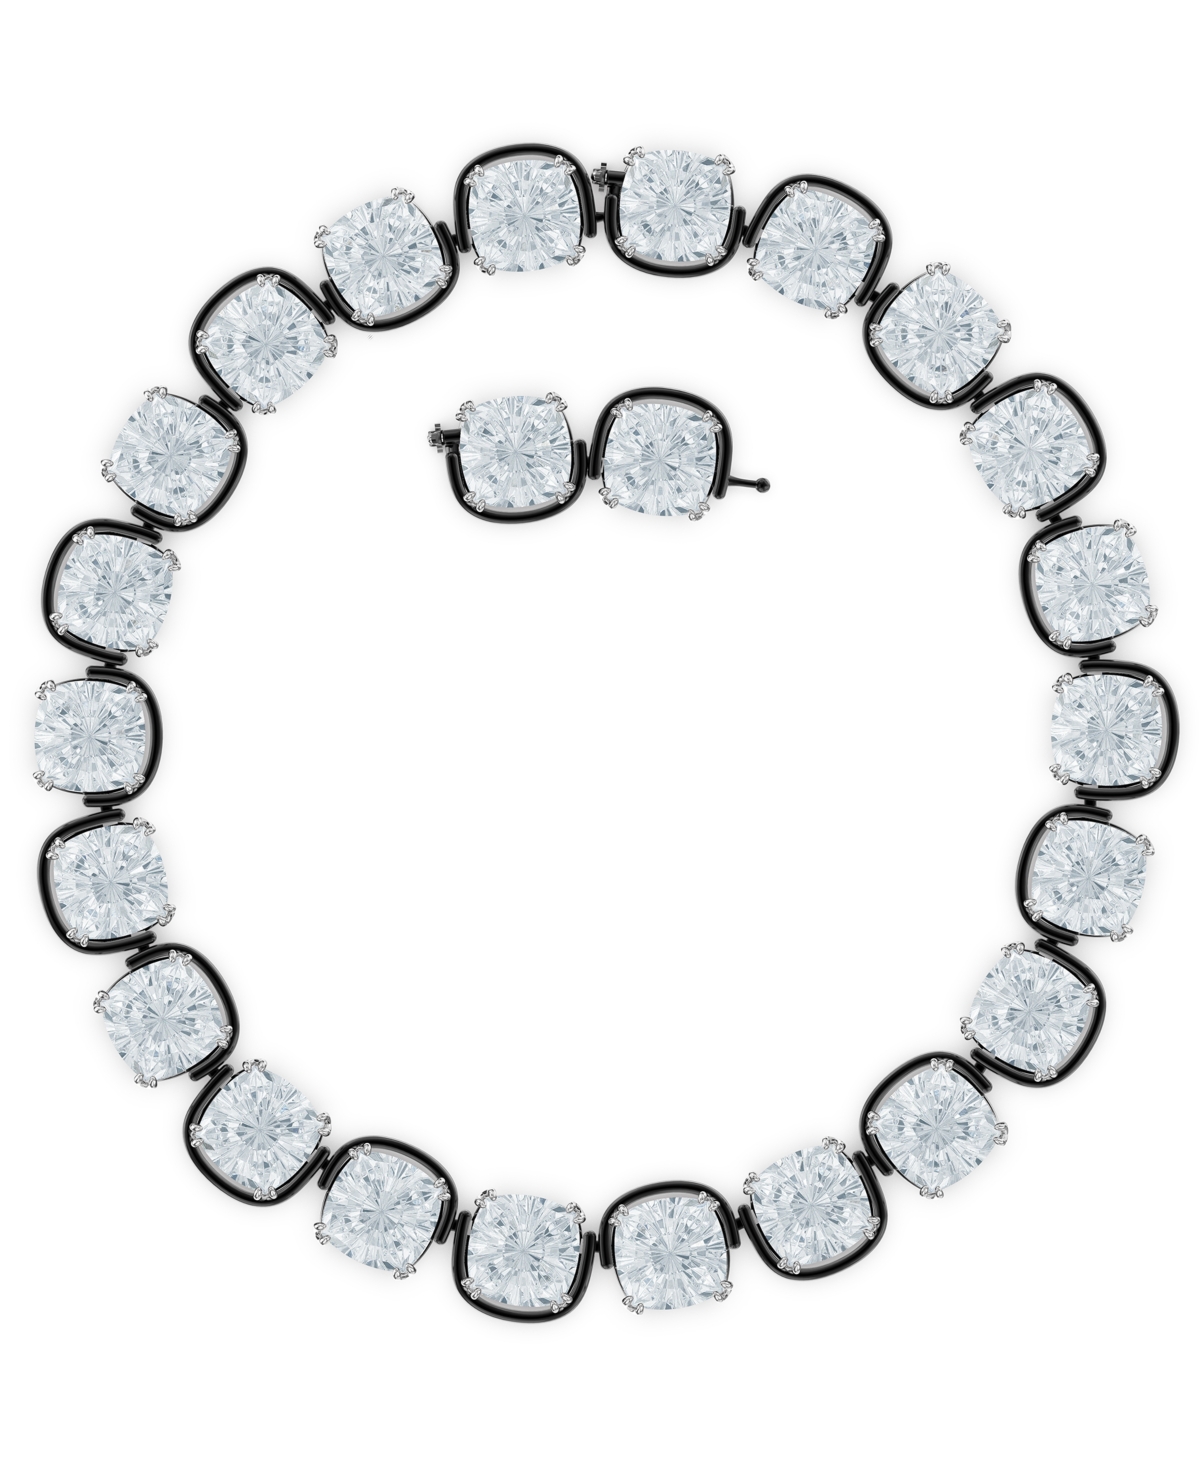 Silver-Tone Crystal Floating Stones Choker Necklace, 14" + 2" extender - White